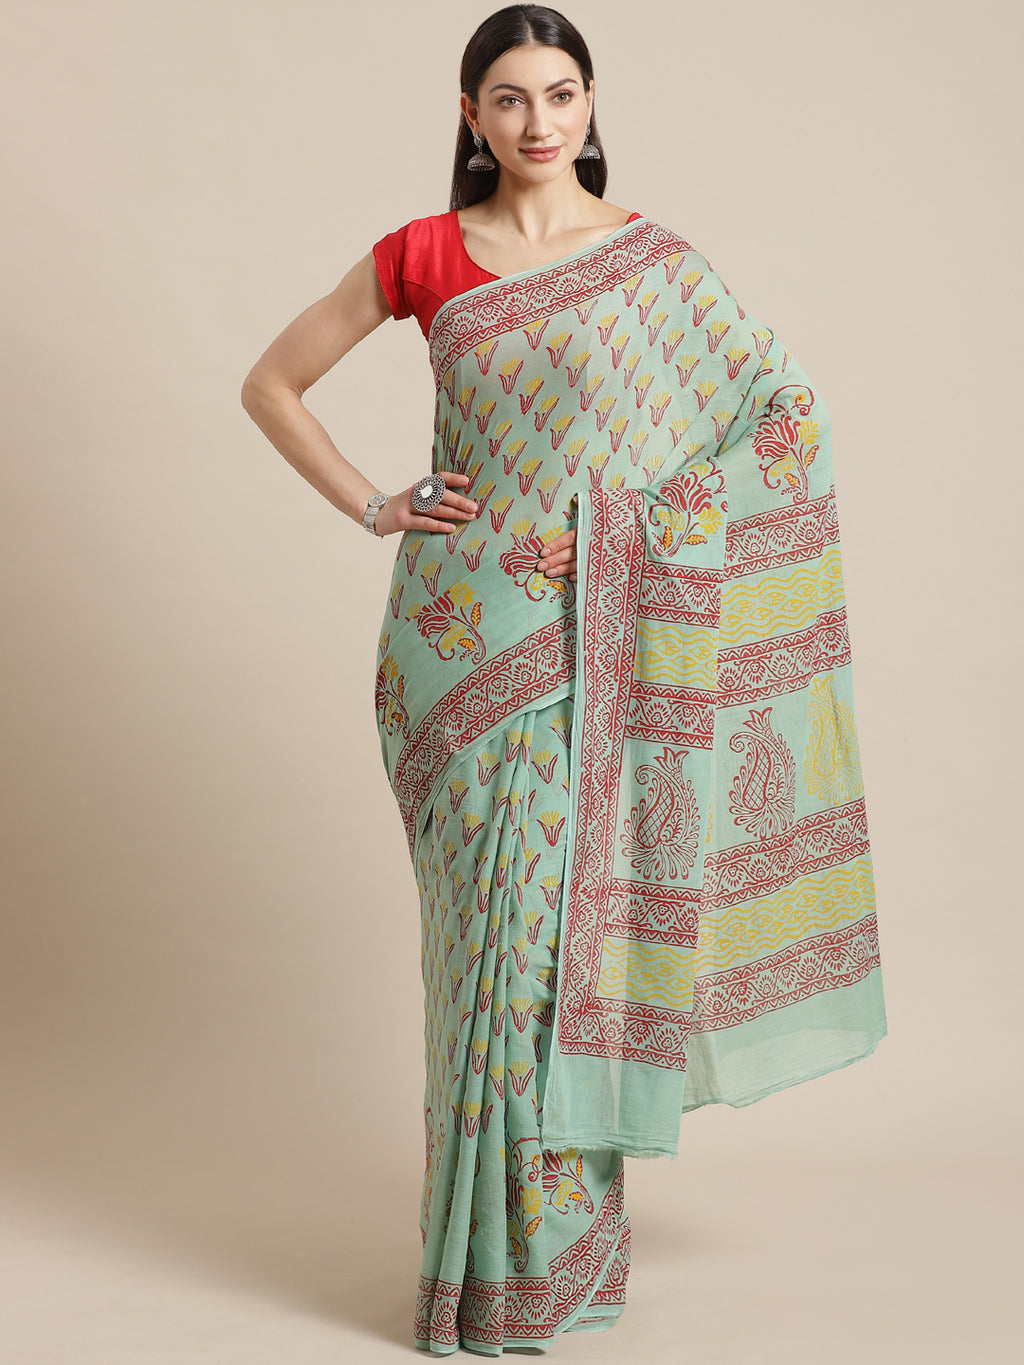 Sea Green and Red, Kalakari India Cotton Green Hand crafted saree with blouse HUPASA0011-Saree-Kalakari India-HUPASA0011-Cotton, Geographical Indication, Hand Block, Hand Crafted, Heritage Prints, Natural Dyes, Red, Sarees, Sustainable Fabrics, Woven, Yellow-[Linen,Ethnic,wear,Fashionista,Handloom,Handicraft,Indigo,blockprint,block,print,Cotton,Chanderi,Blue, latest,classy,party,bollywood,trendy,summer,style,traditional,formal,elegant,unique,style,hand,block,print, dabu,booti,gift,present,glamor